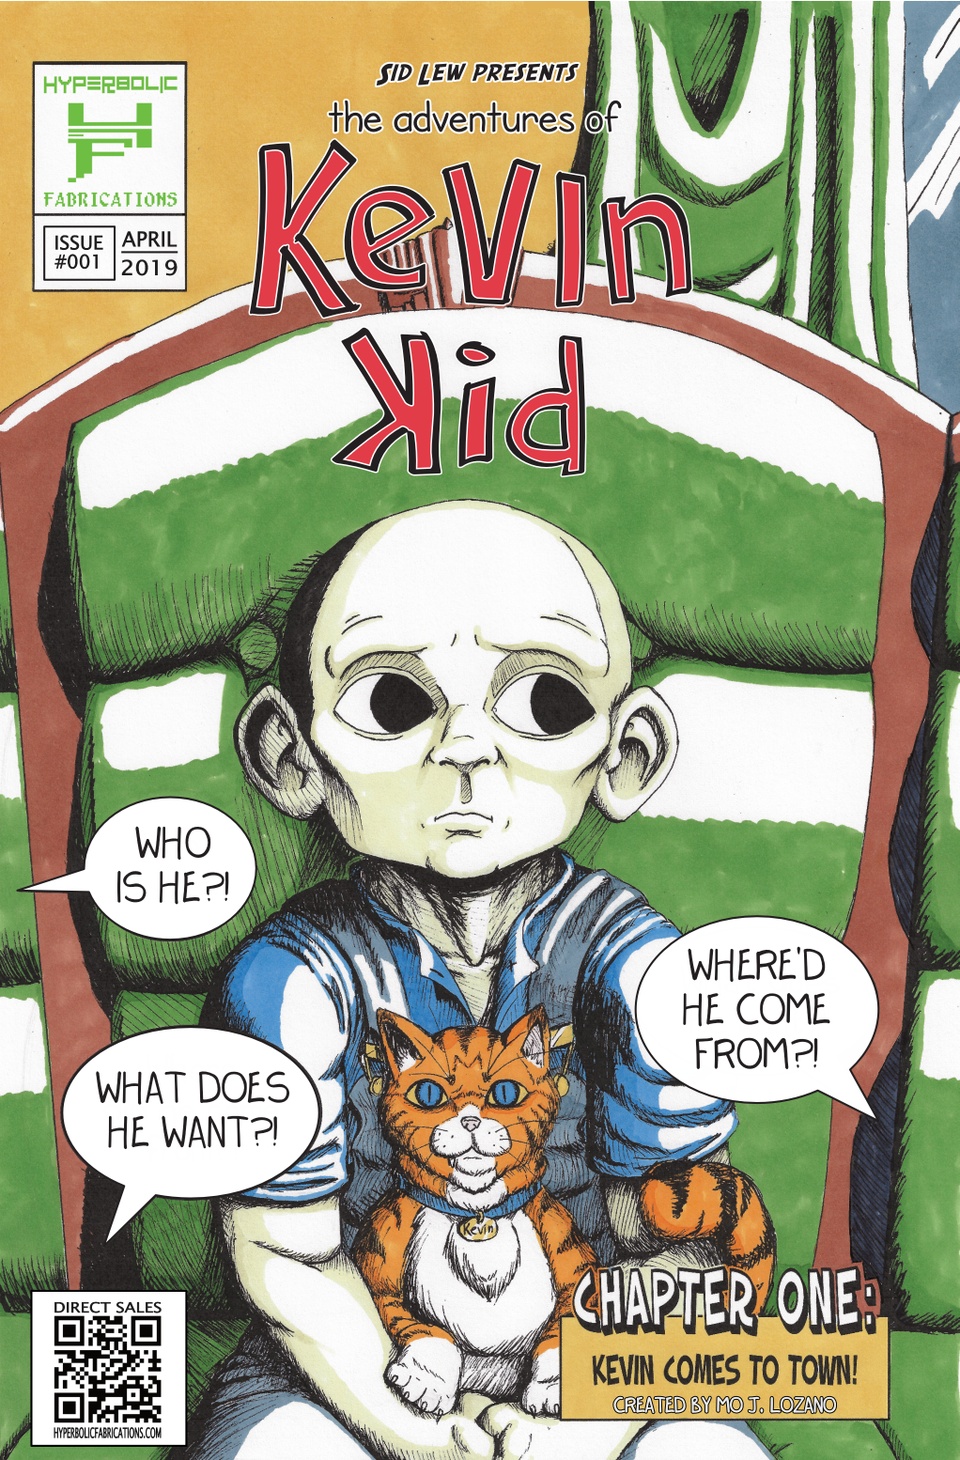 Issue 001 Cover